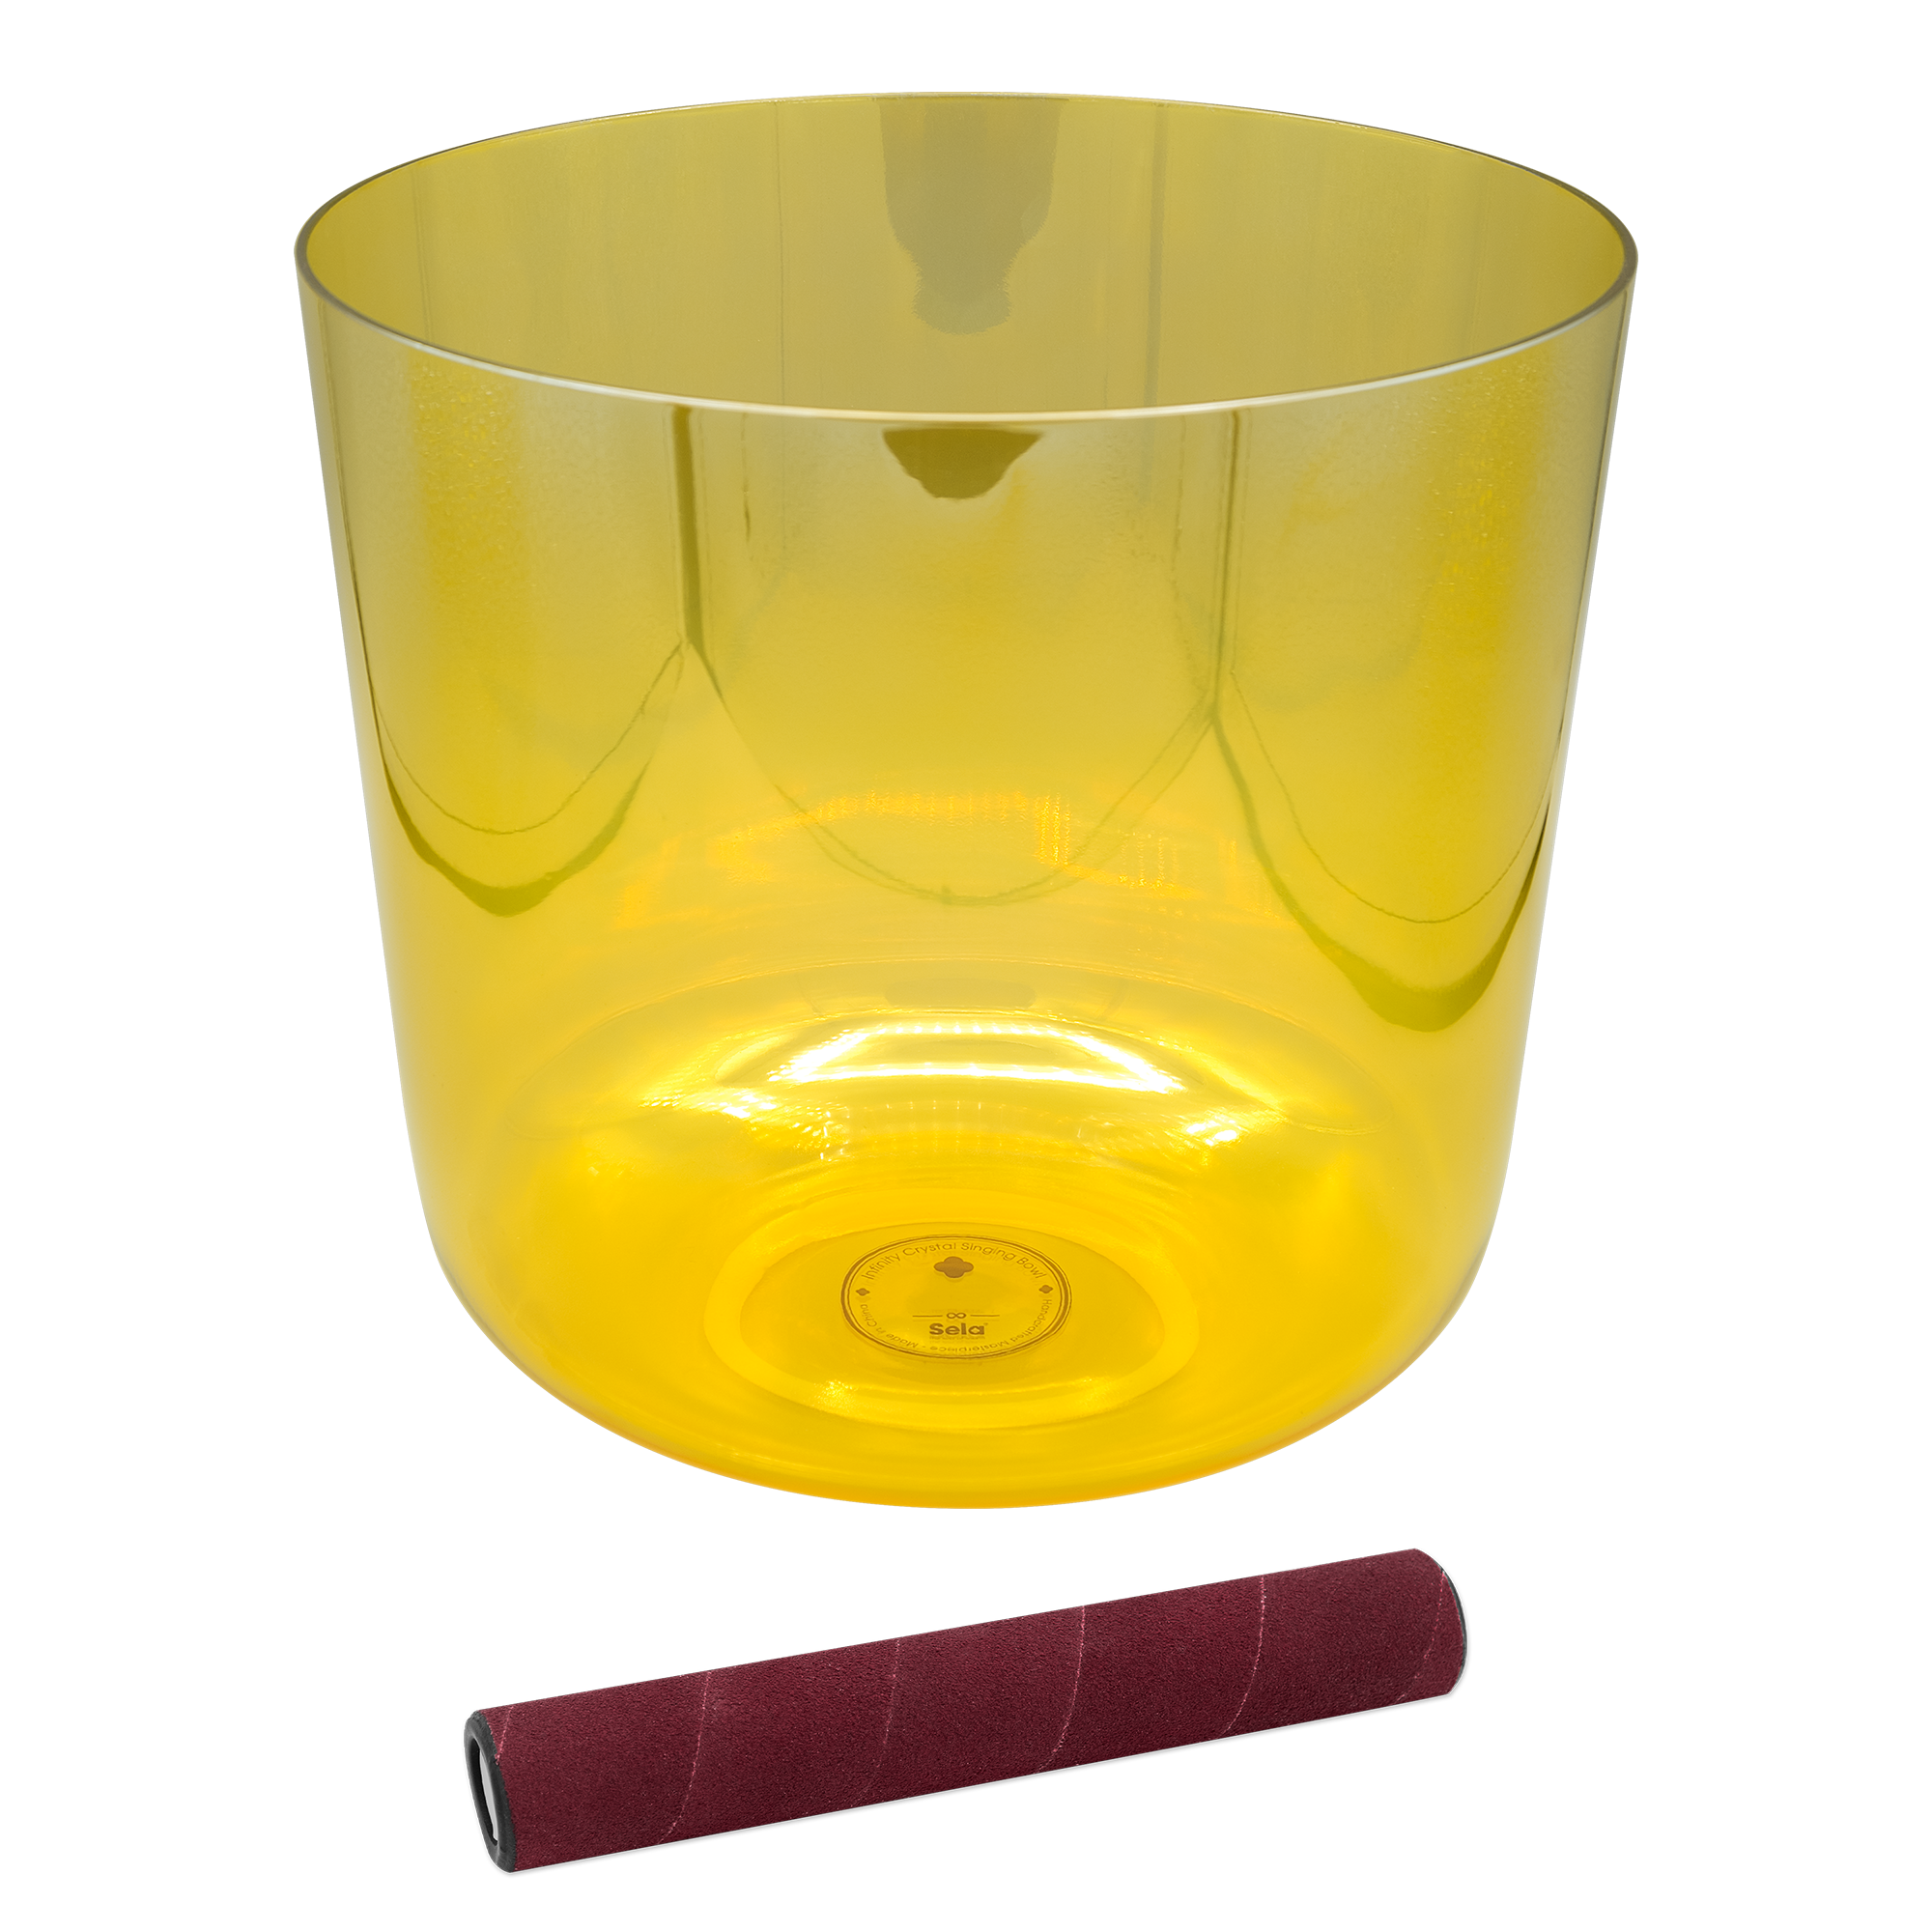 8.0” Infinity Crystal Singing Bowl in F3, 432 Hz, Yellow